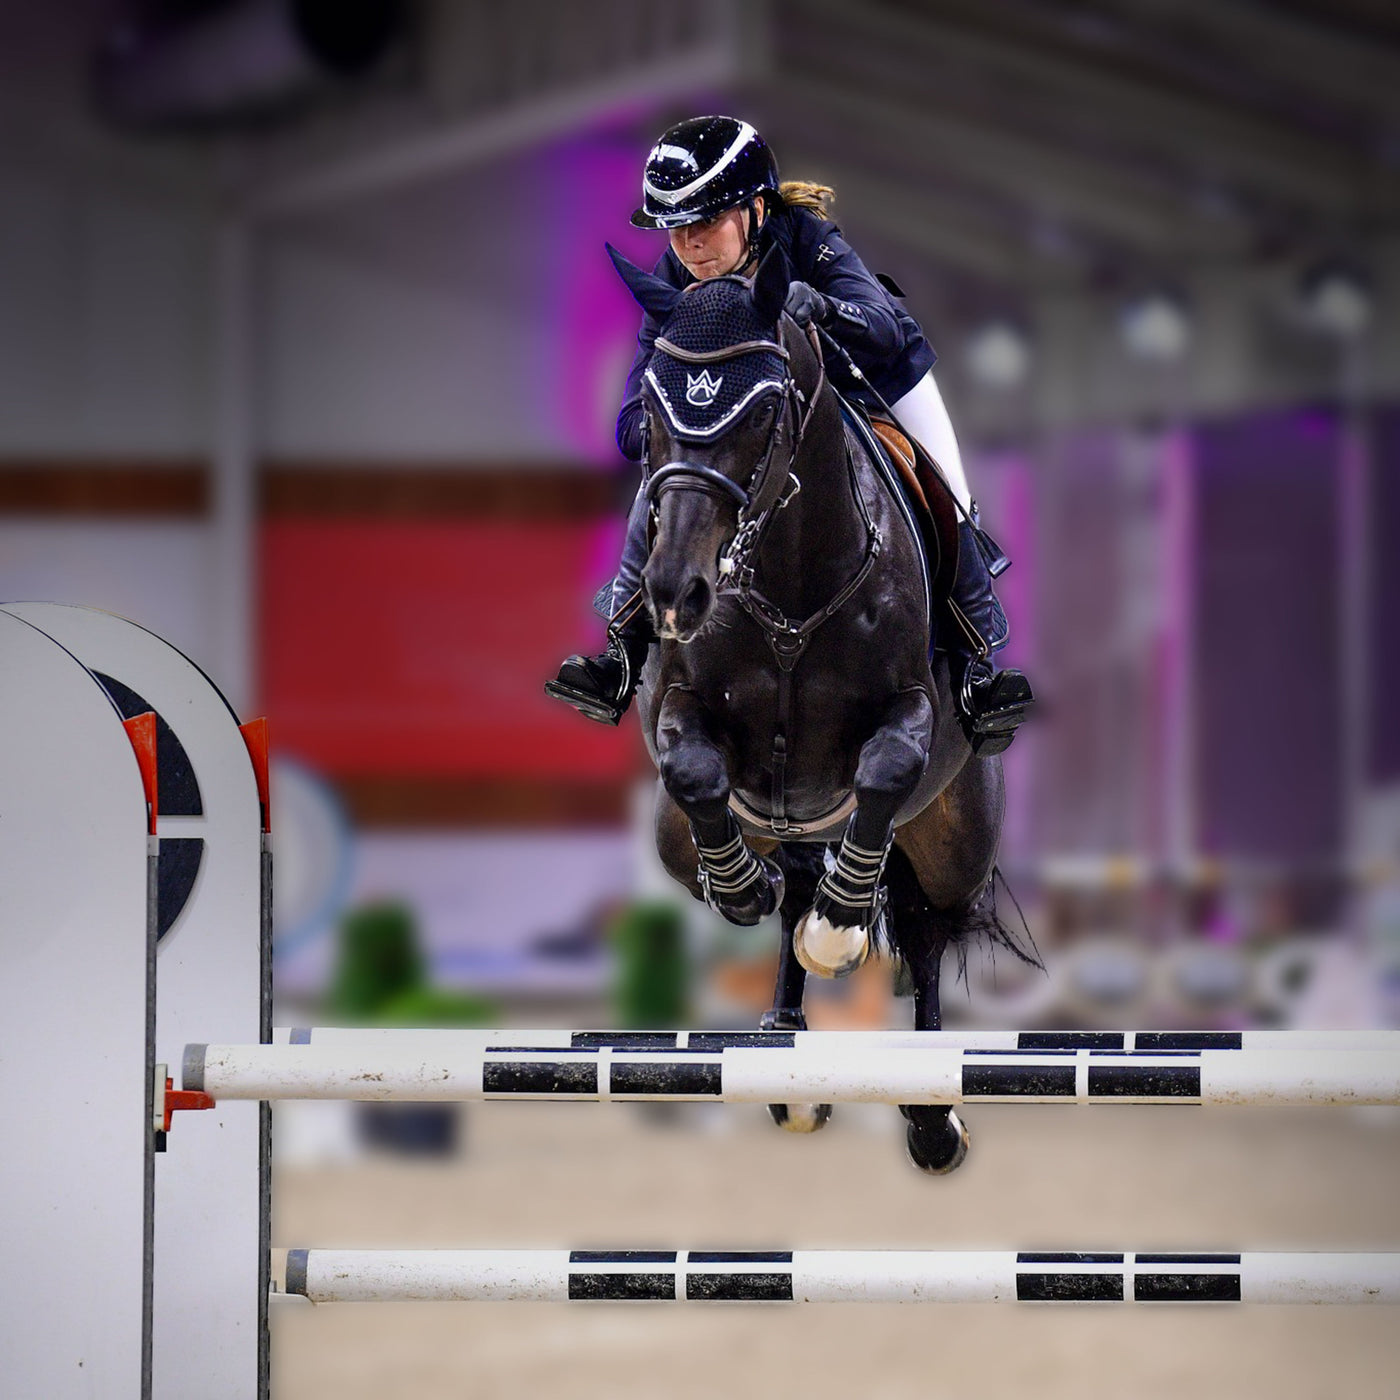 Ophena S Pro used by showjumper Alexandra Crown